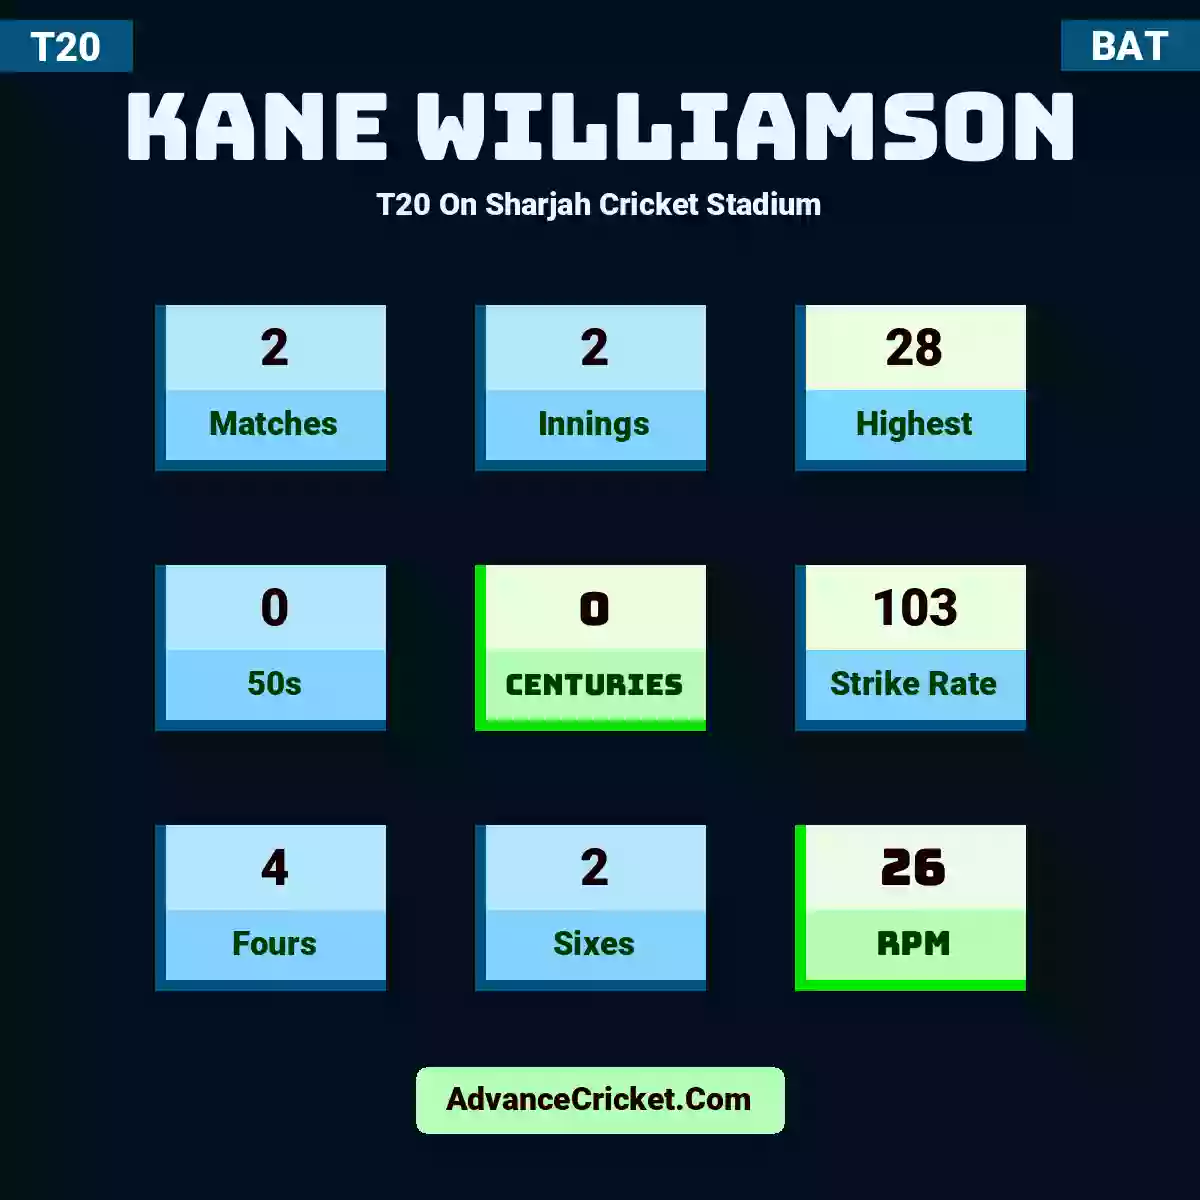 Kane Williamson T20  On Sharjah Cricket Stadium, Kane Williamson played 2 matches, scored 28 runs as highest, 0 half-centuries, and 0 centuries, with a strike rate of 103. K.Williamson hit 4 fours and 2 sixes, with an RPM of 26.